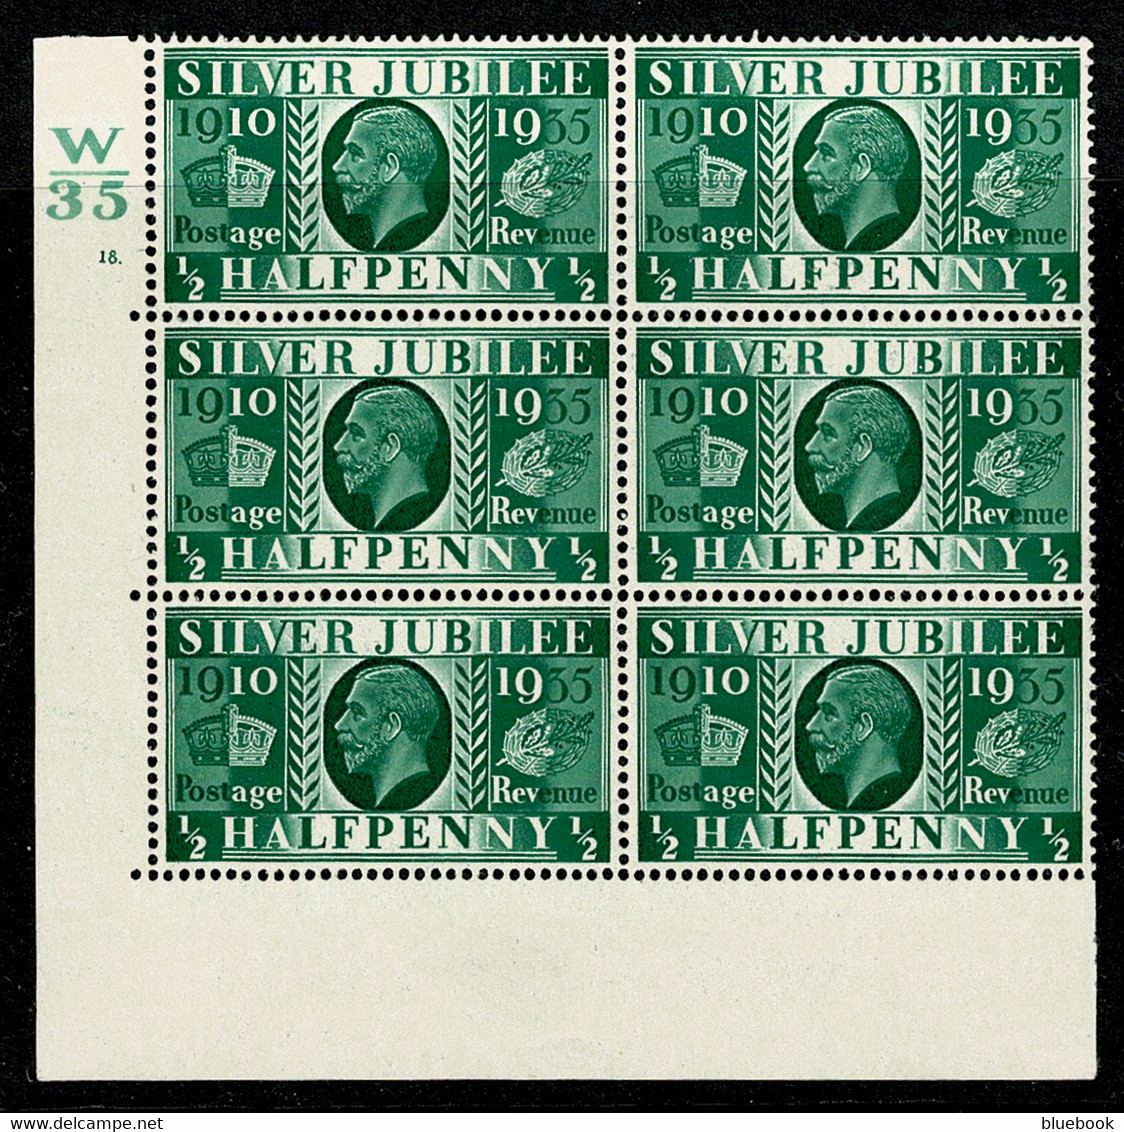 Ref 1587 - GB 1935 Silver Jubilee 1/2d Control Block (W35) Cylinder 18. Of 6 Stamps MNH/MM - Nuovi